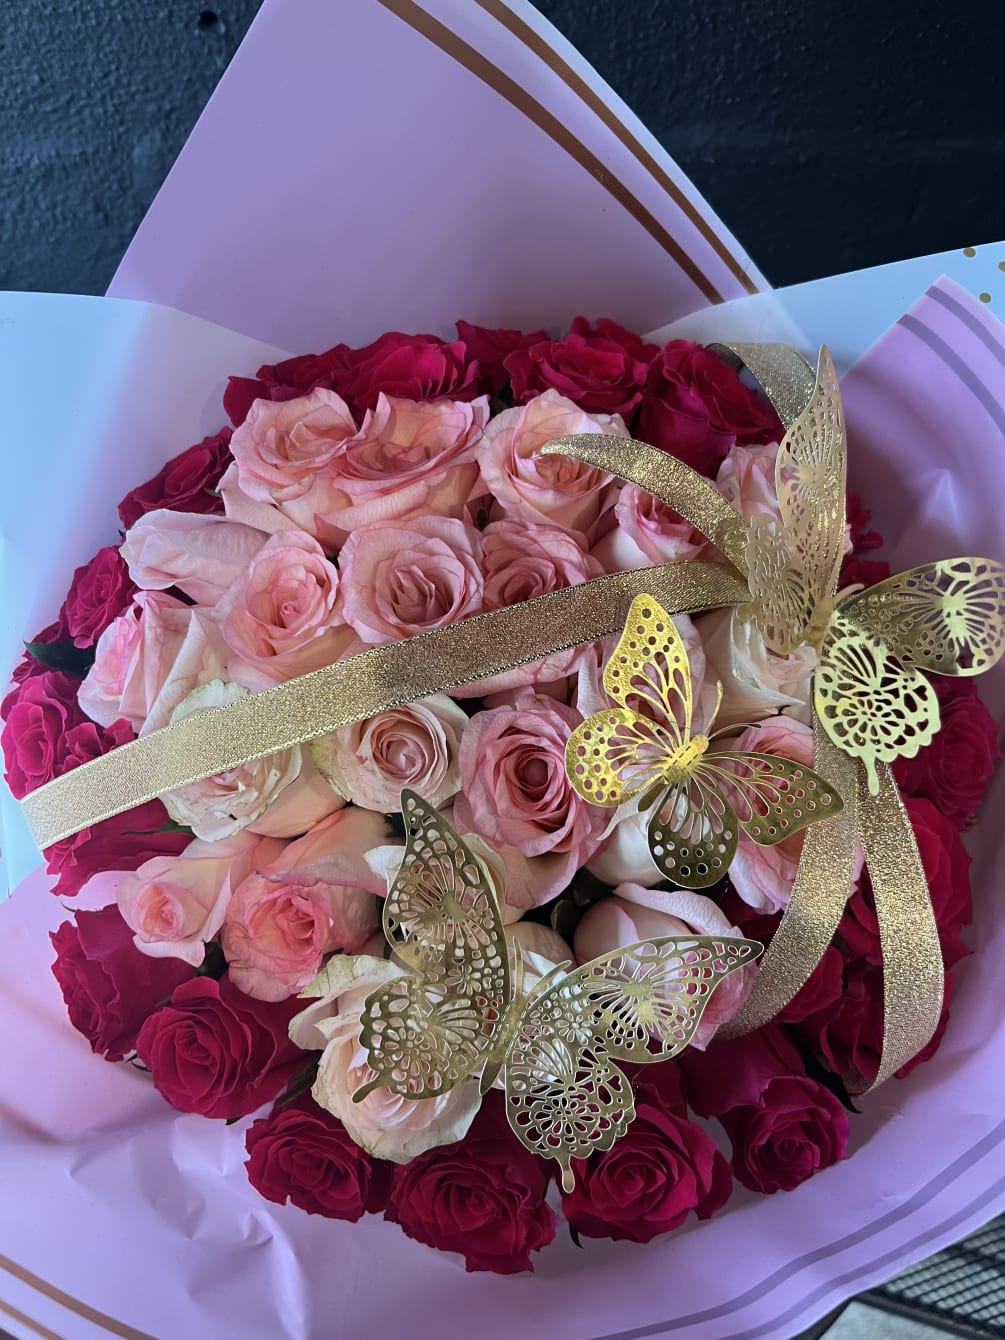 Beautiful 50 roses bouquet hot pink and light pink roses adding cute